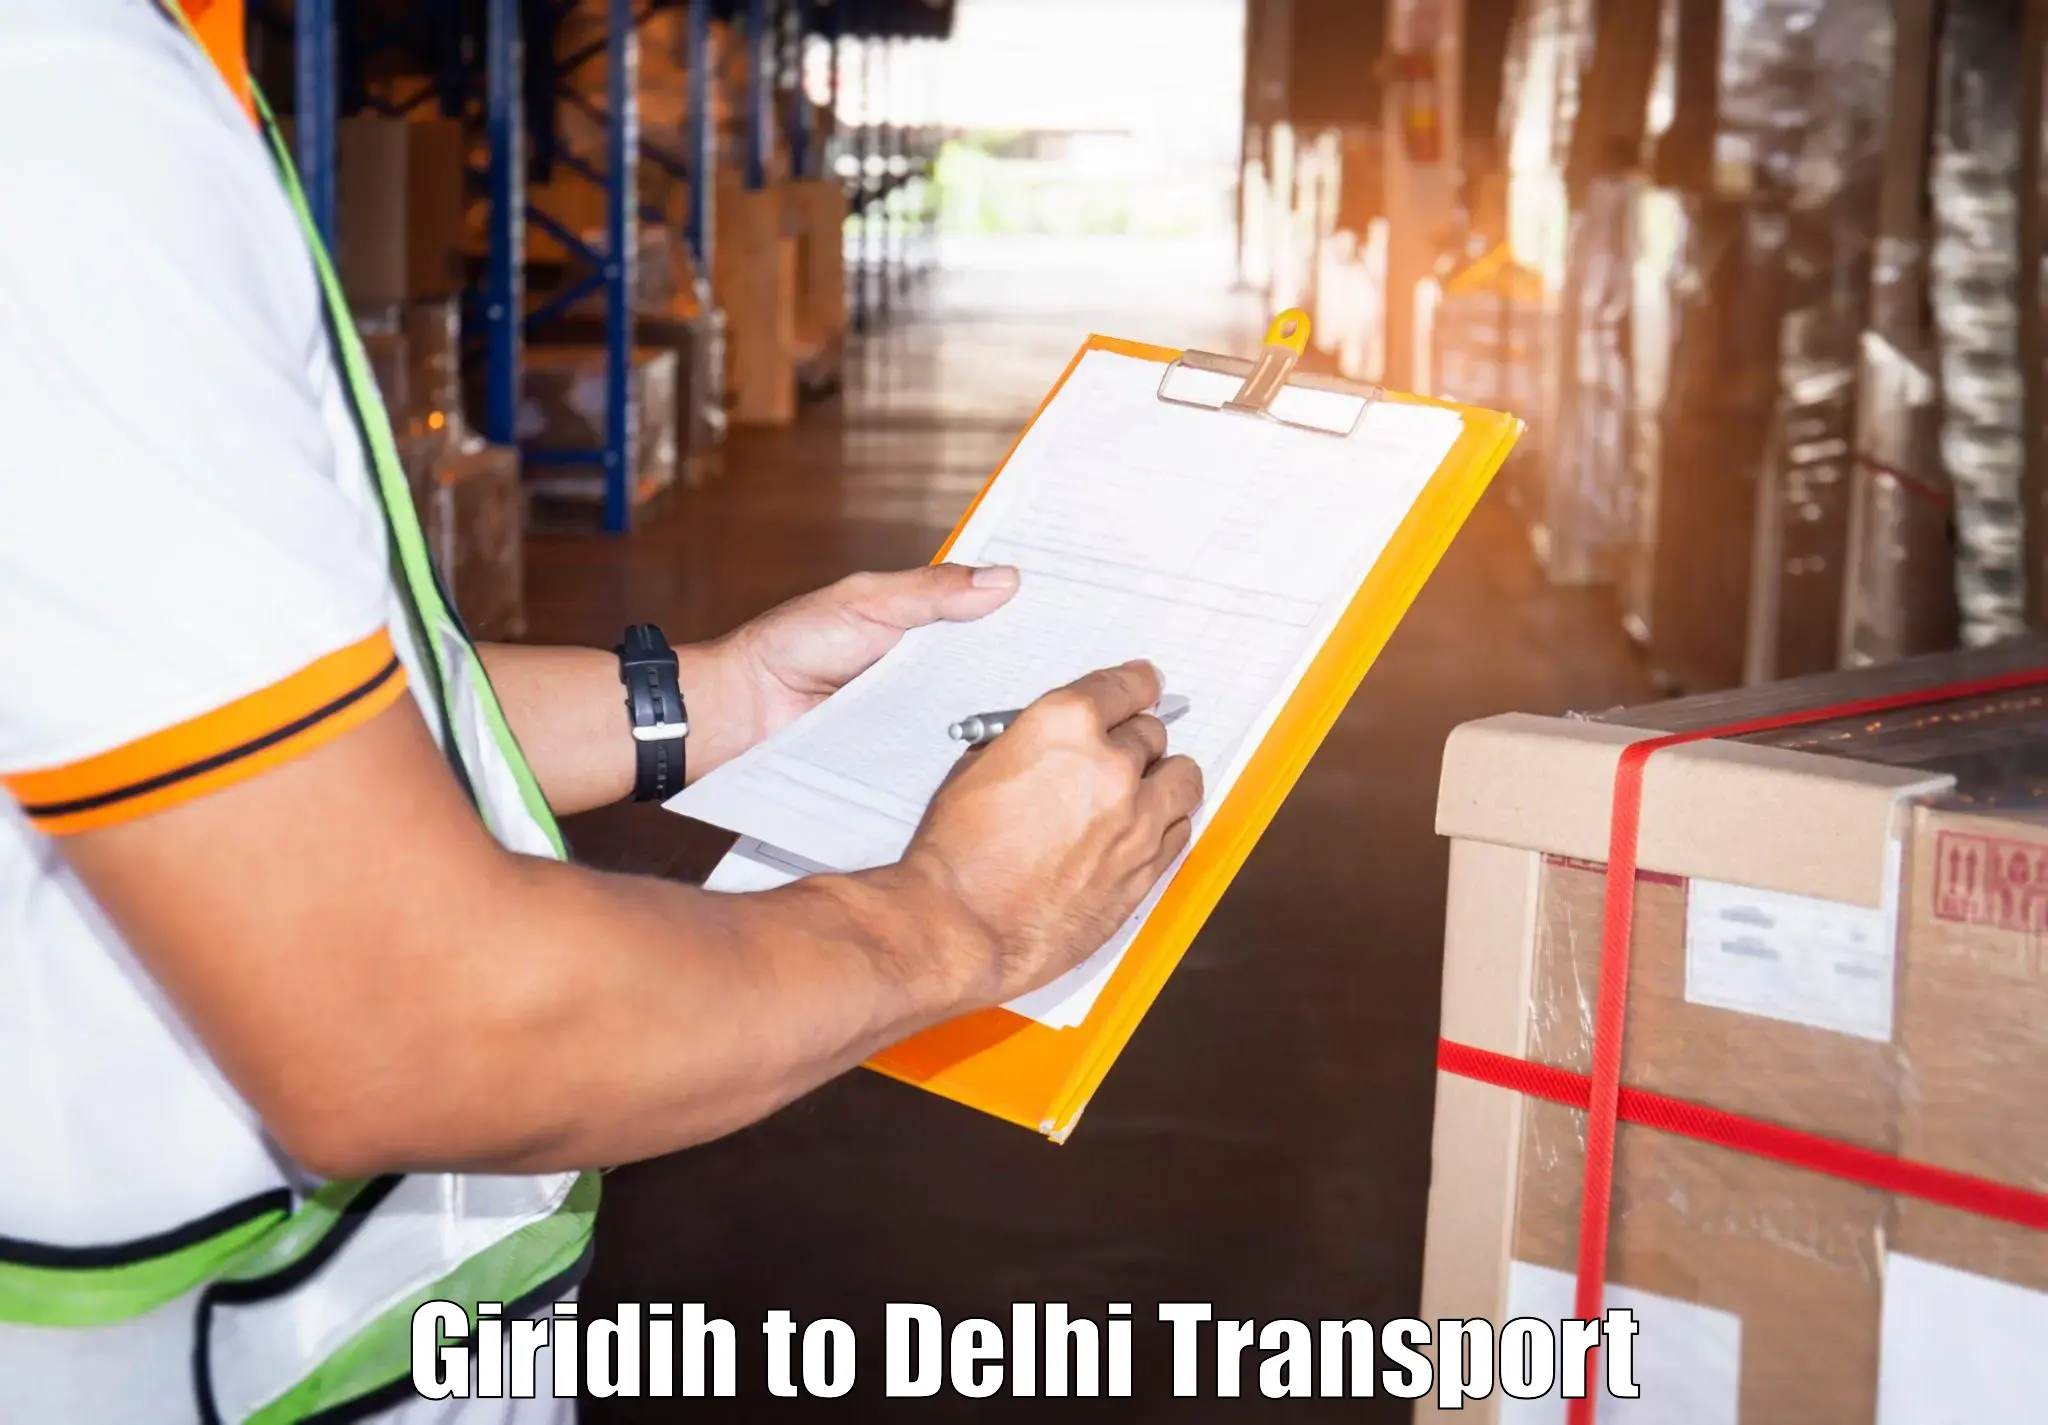 Container transport service Giridih to East Delhi